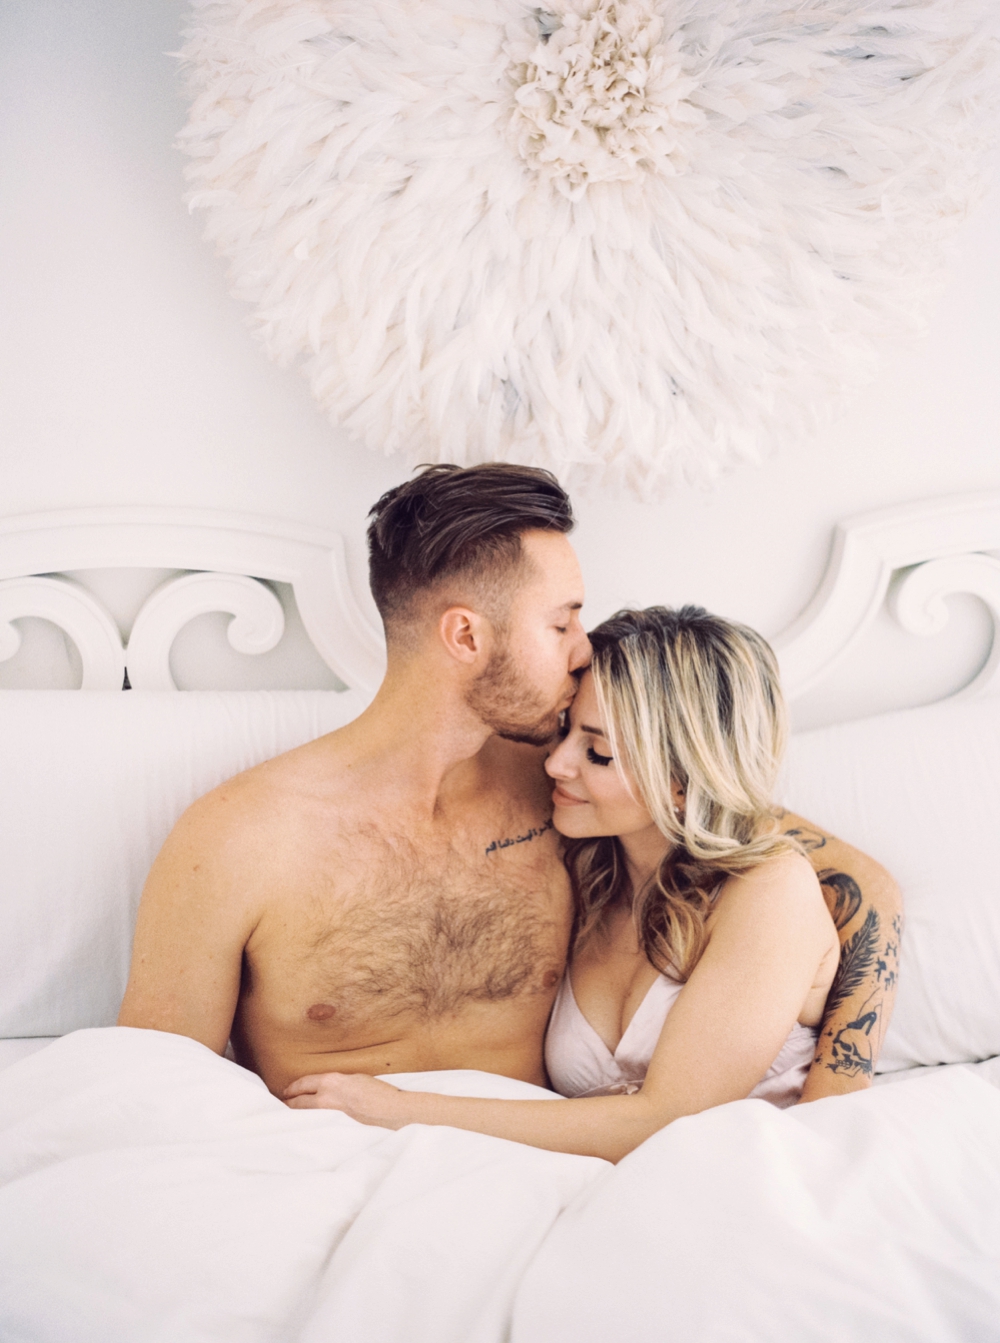 Calgary Wedding Photographers | Calgary couples photographer | In home session | intimate couples session | Justine Milton Photography